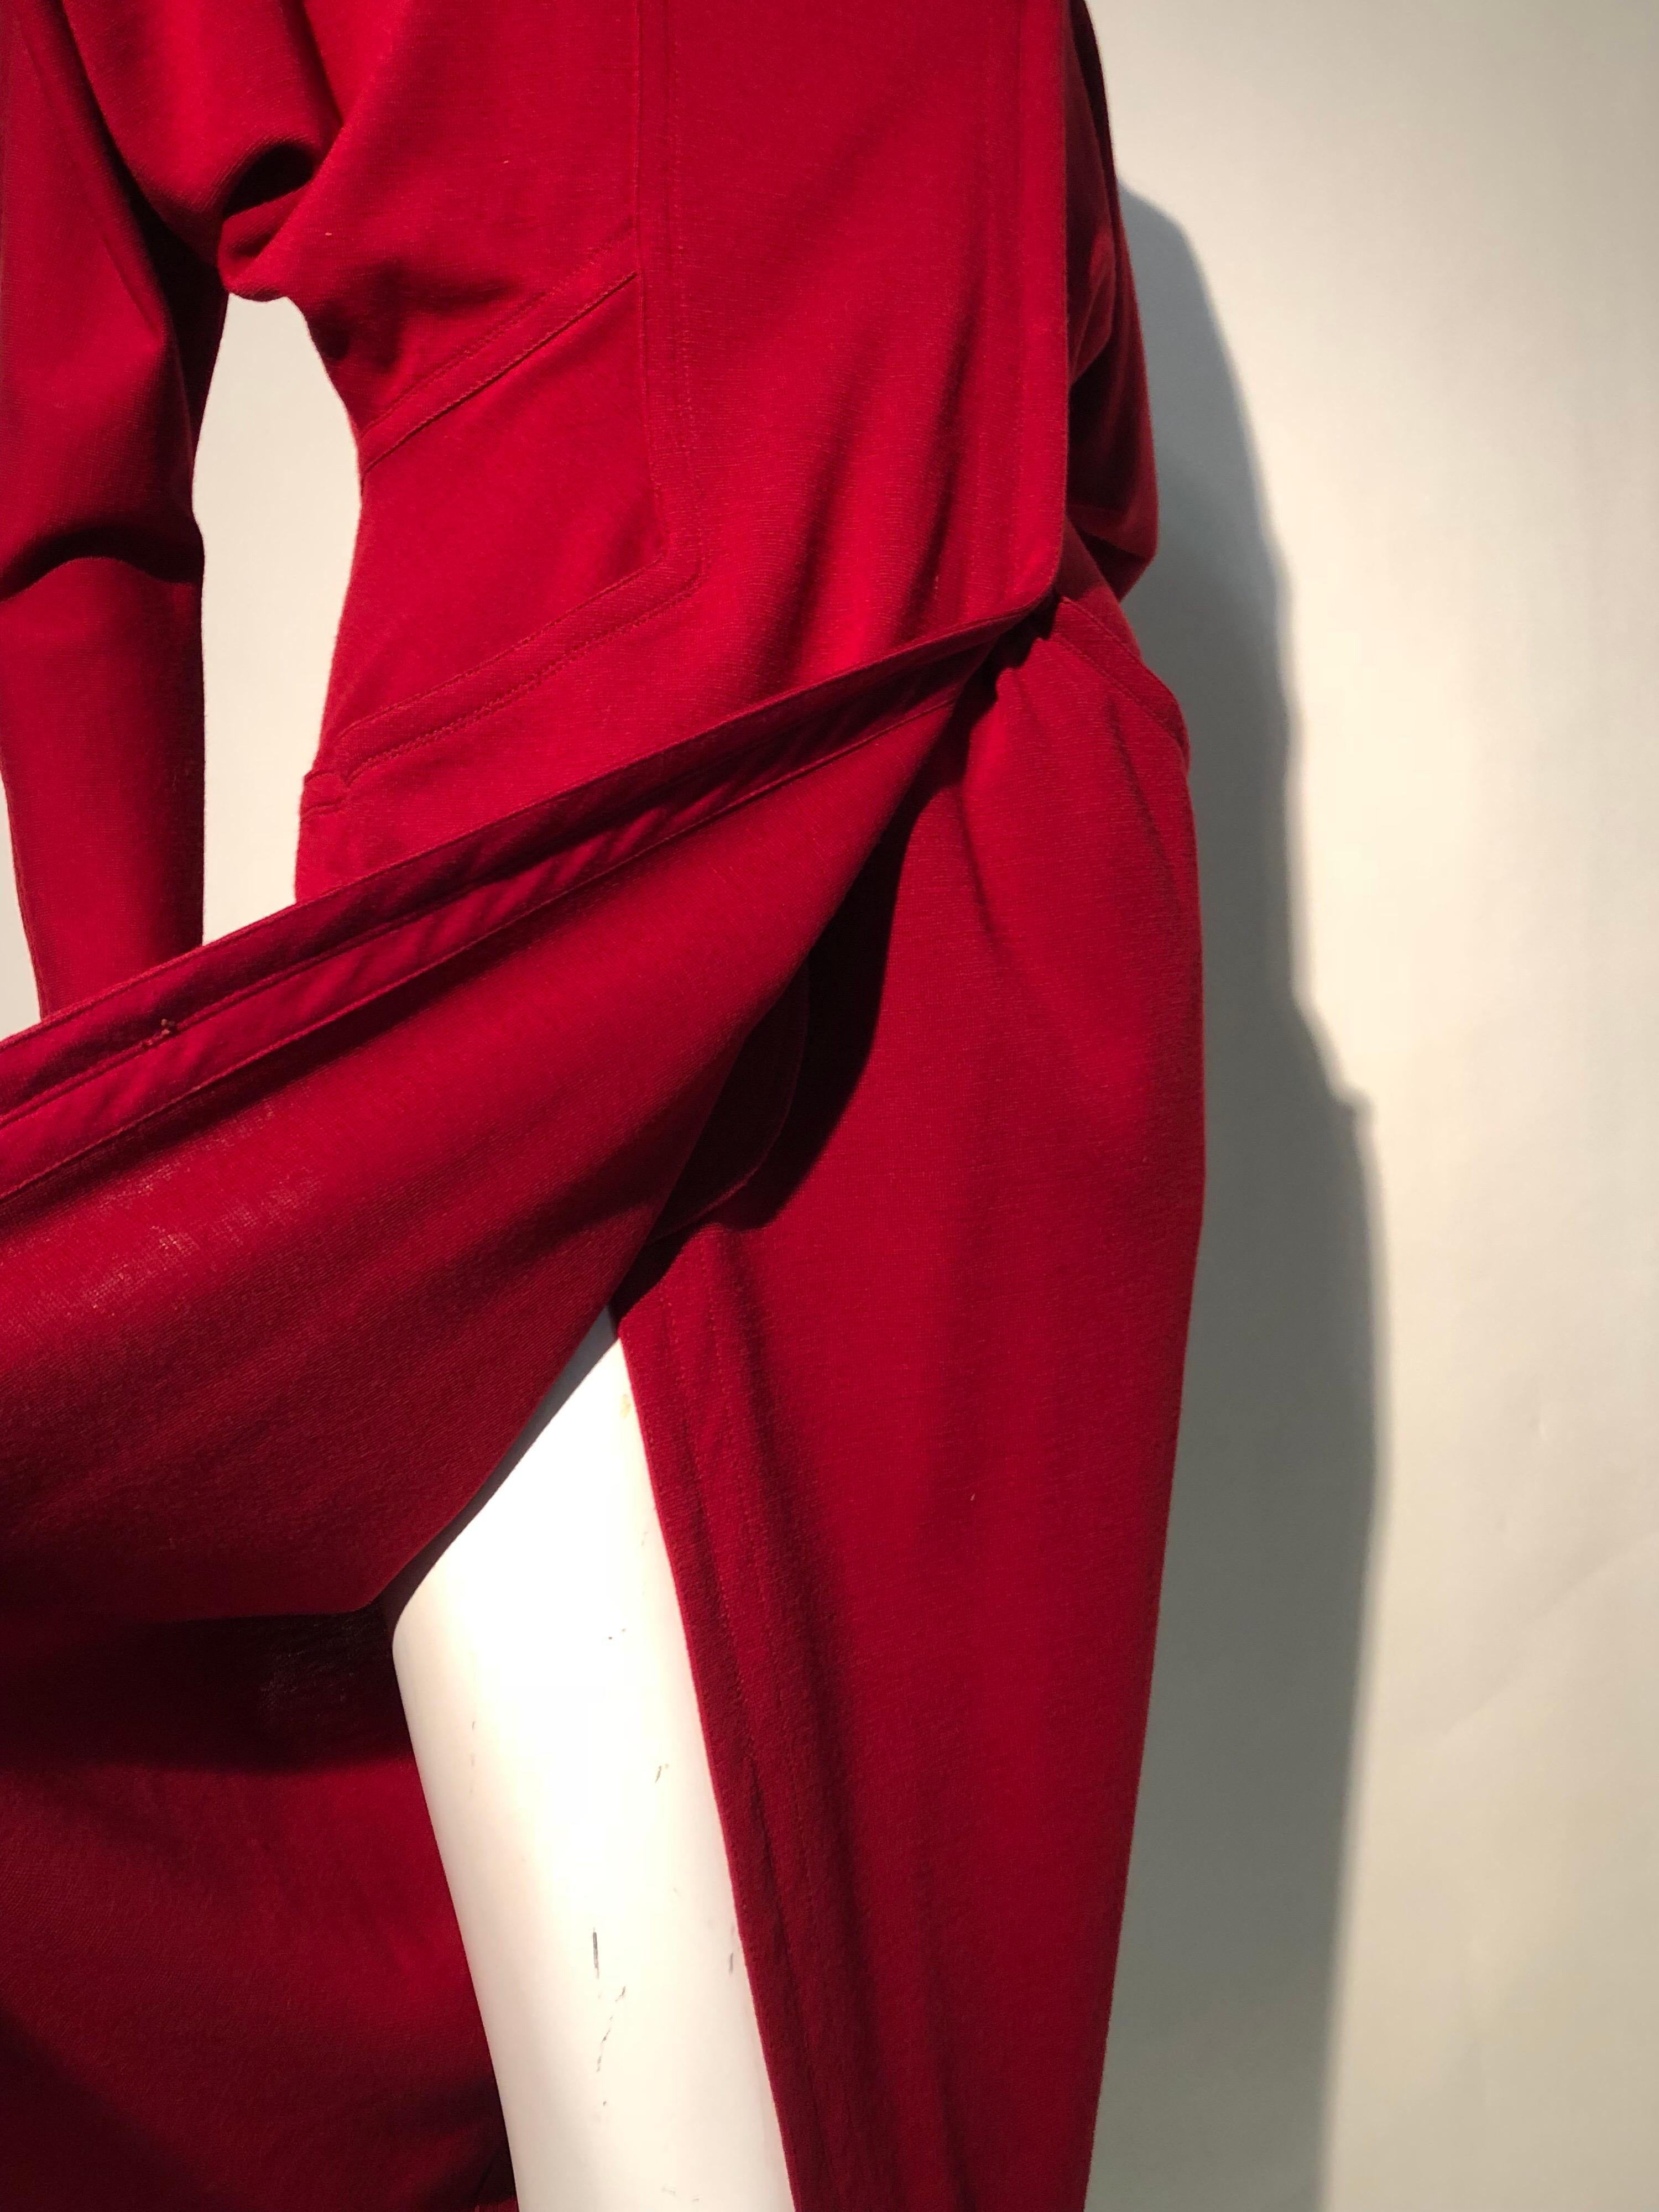 1980s Gianni Versace Vivid Red Wool Wrap-Style Coat Dress W/ Attached Foulard For Sale 2